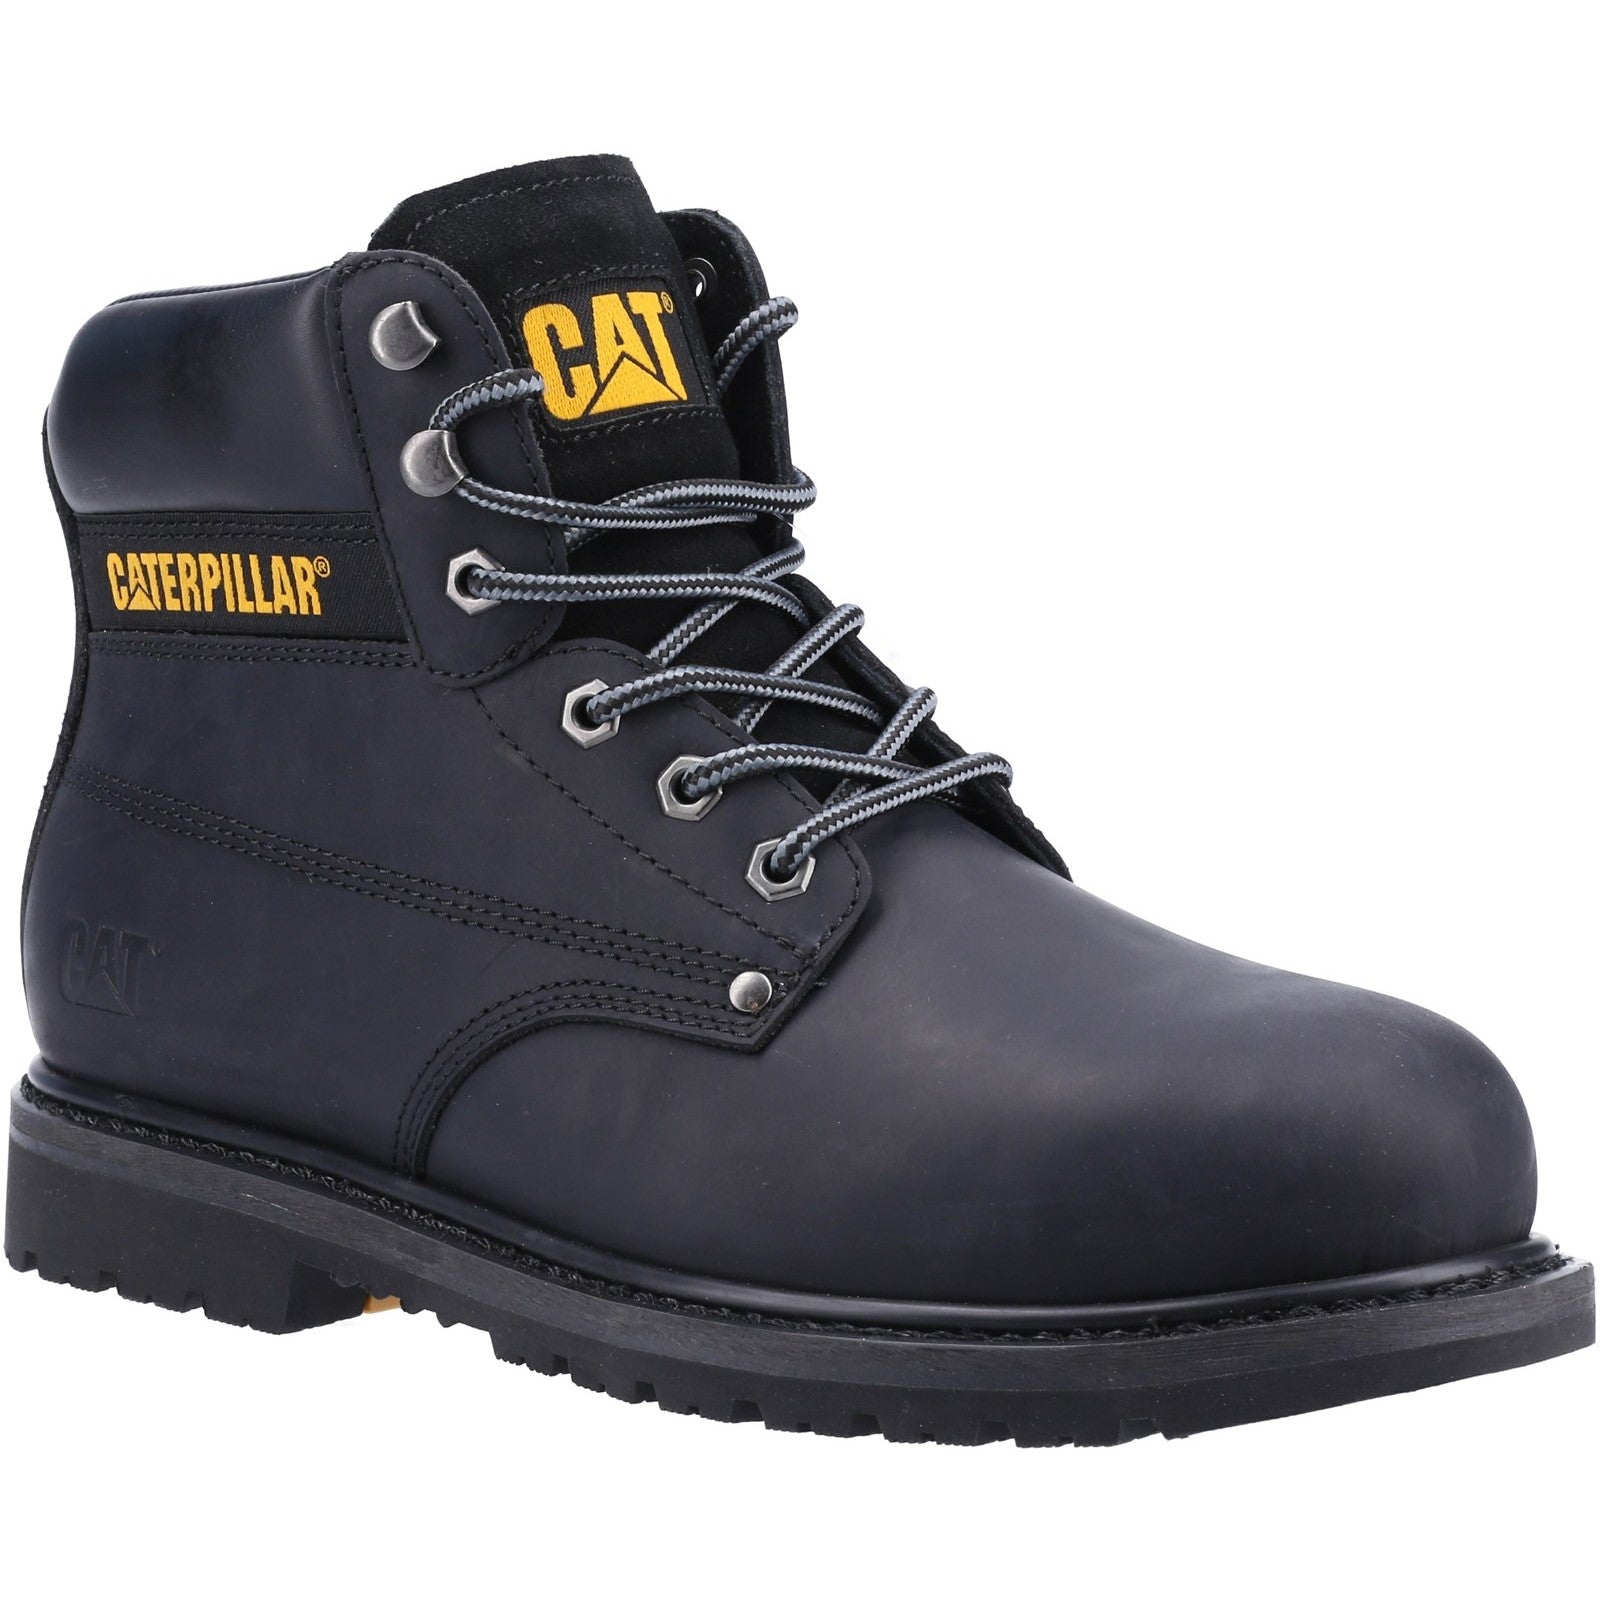 CAT Powerplant S3 GYW Safety Boot